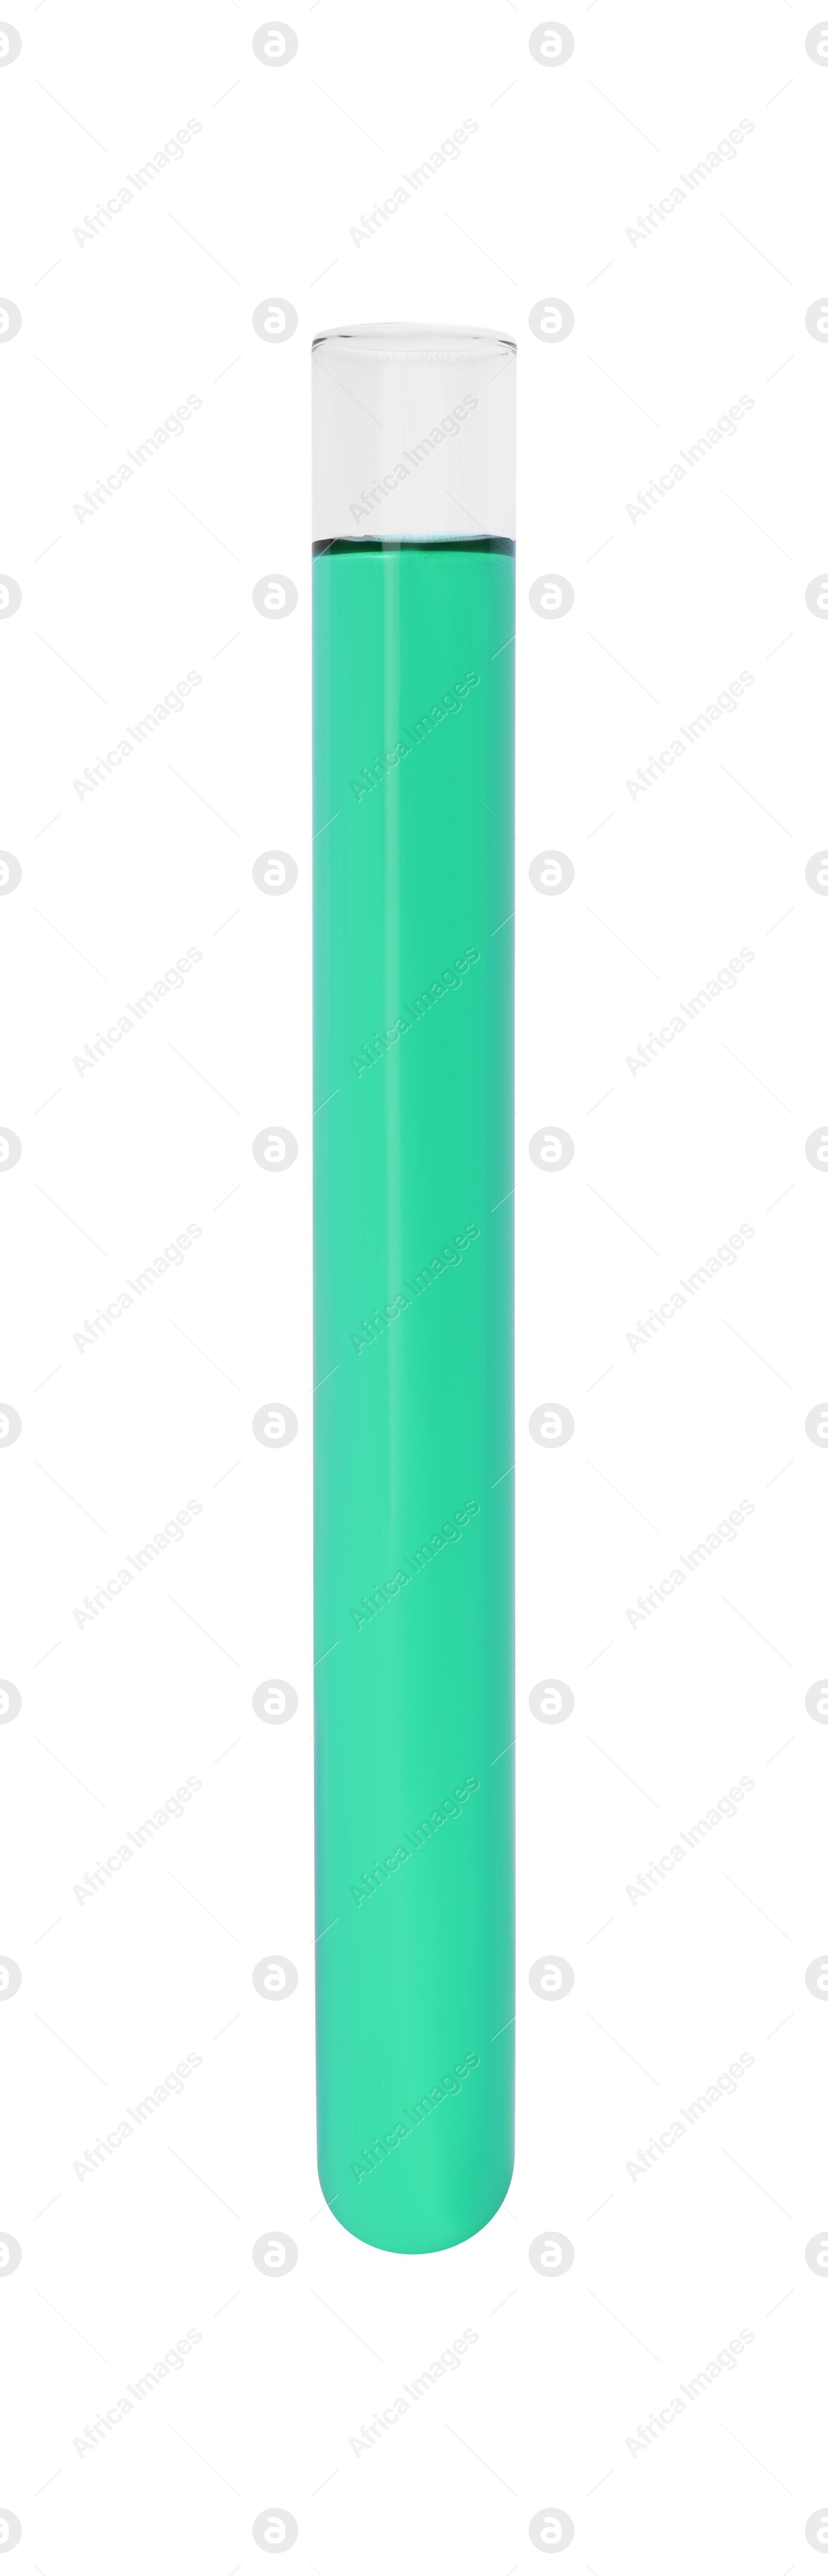 Photo of Test tube with green liquid isolated on white